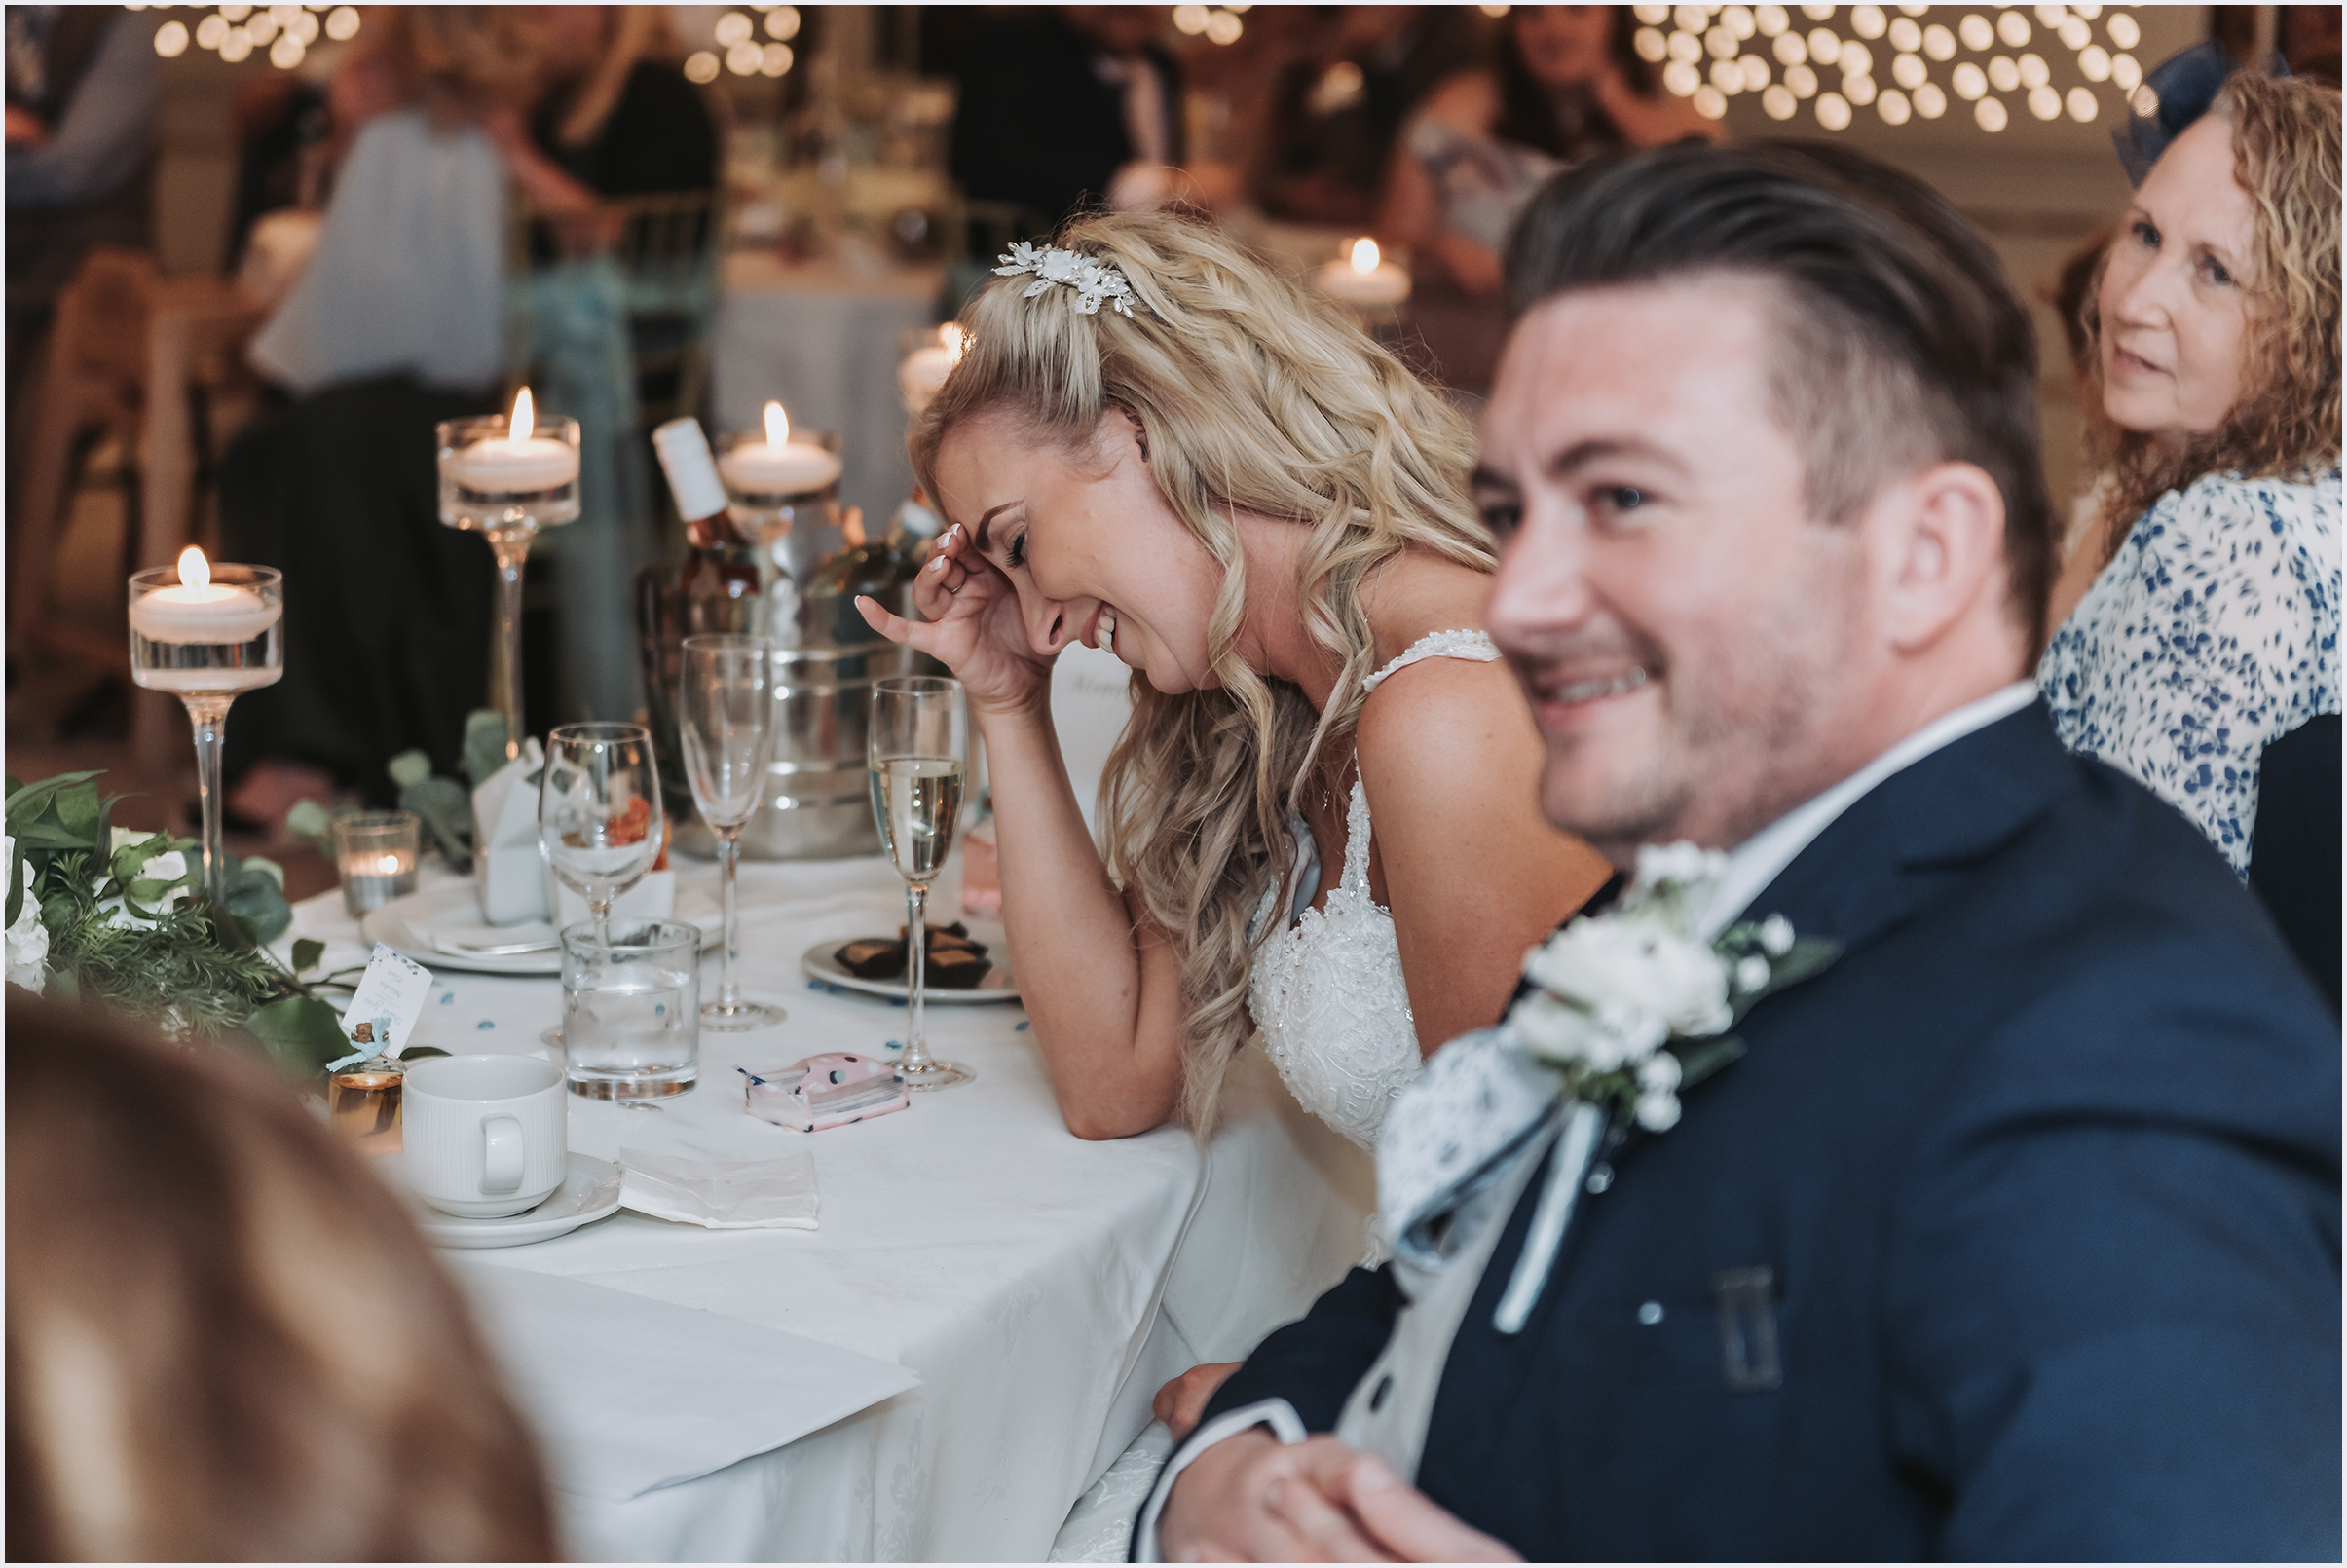 A bride holding her head in her hand laughing at the best man's speech.